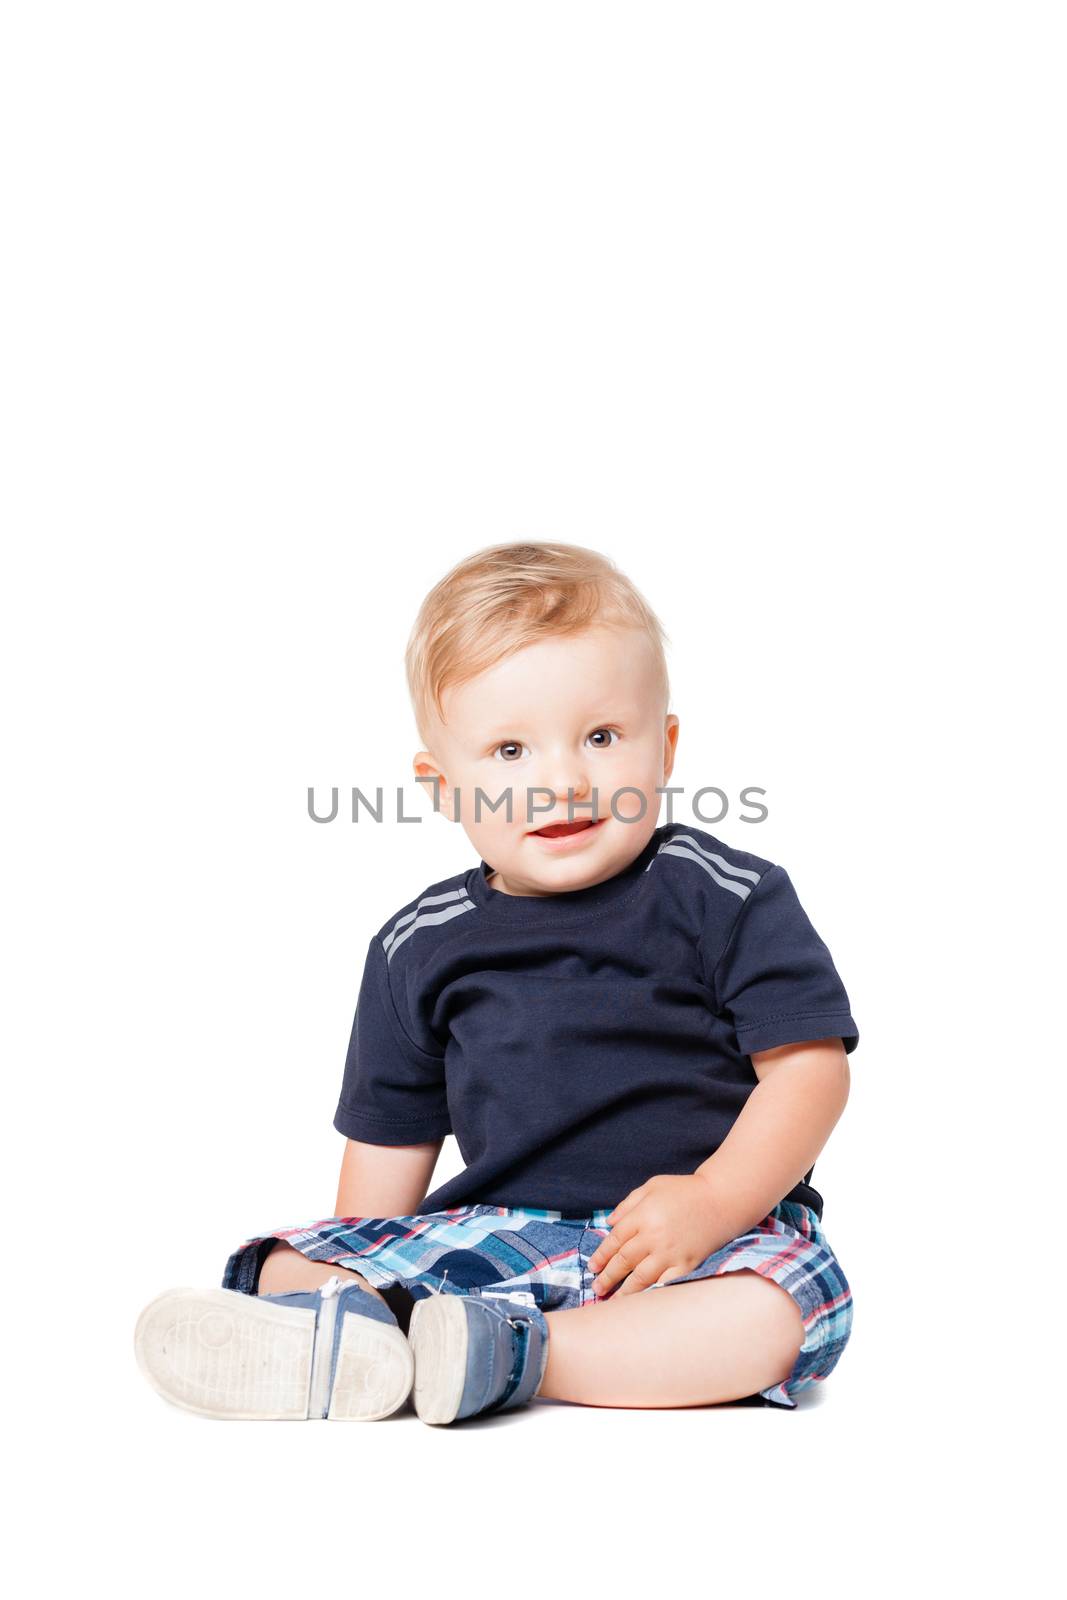 happy baby boy sitting on the floor, isolated on white